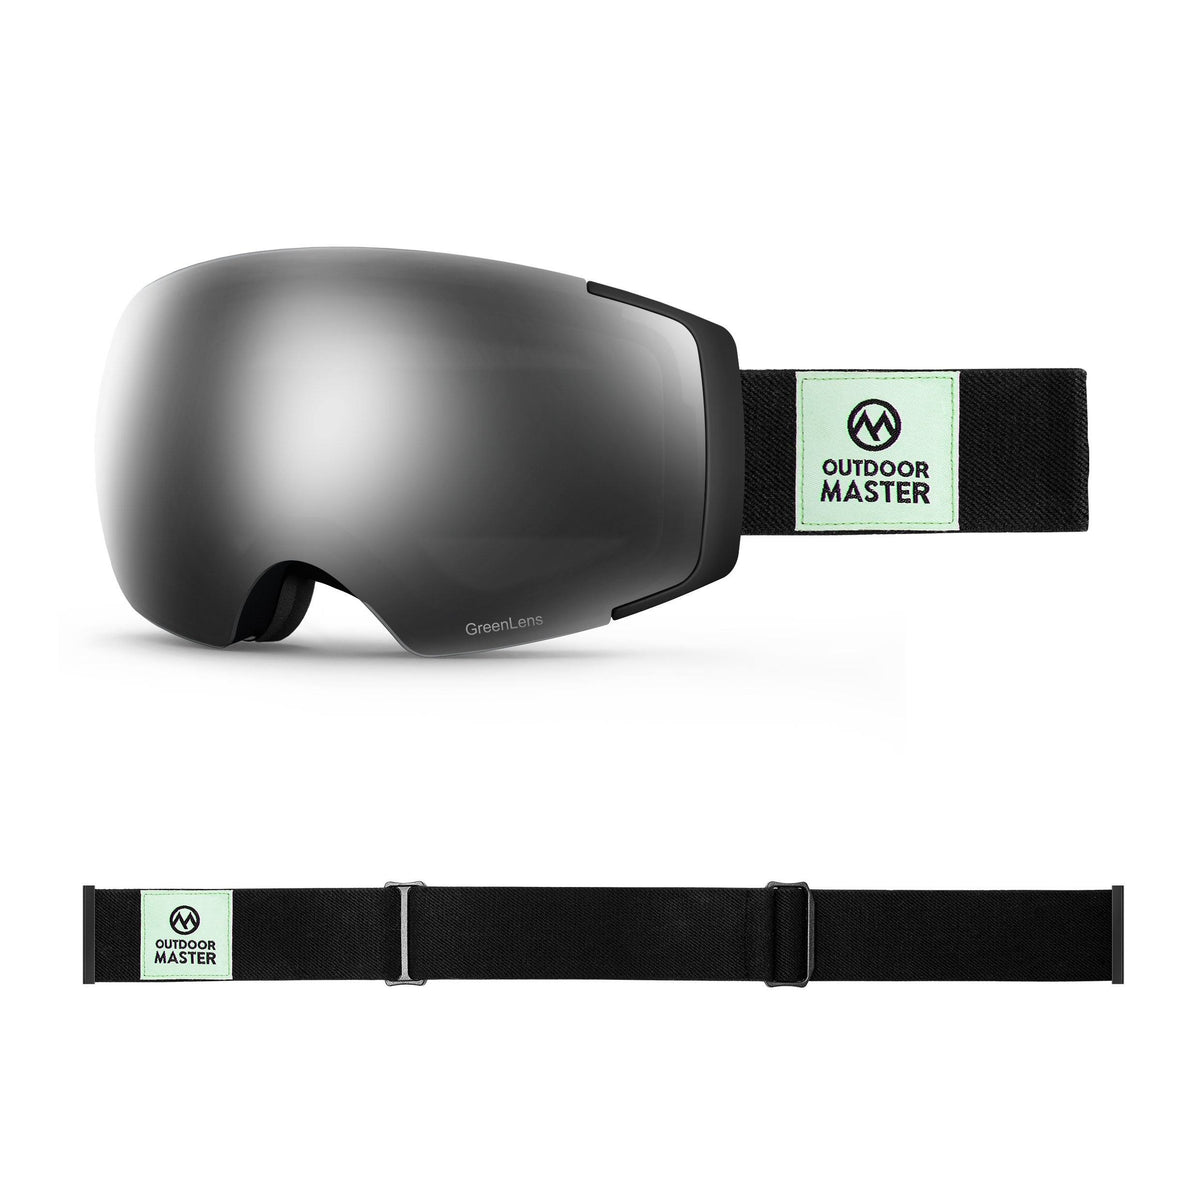 Eco-friendly Ski Goggles Pro Series - The Disappearing Places/Classic BambooStraps Limited Edition OutdoorMaster GreenLens VLT 10% TAC Grey With REVO Silver Polarized Classic BambooStraps